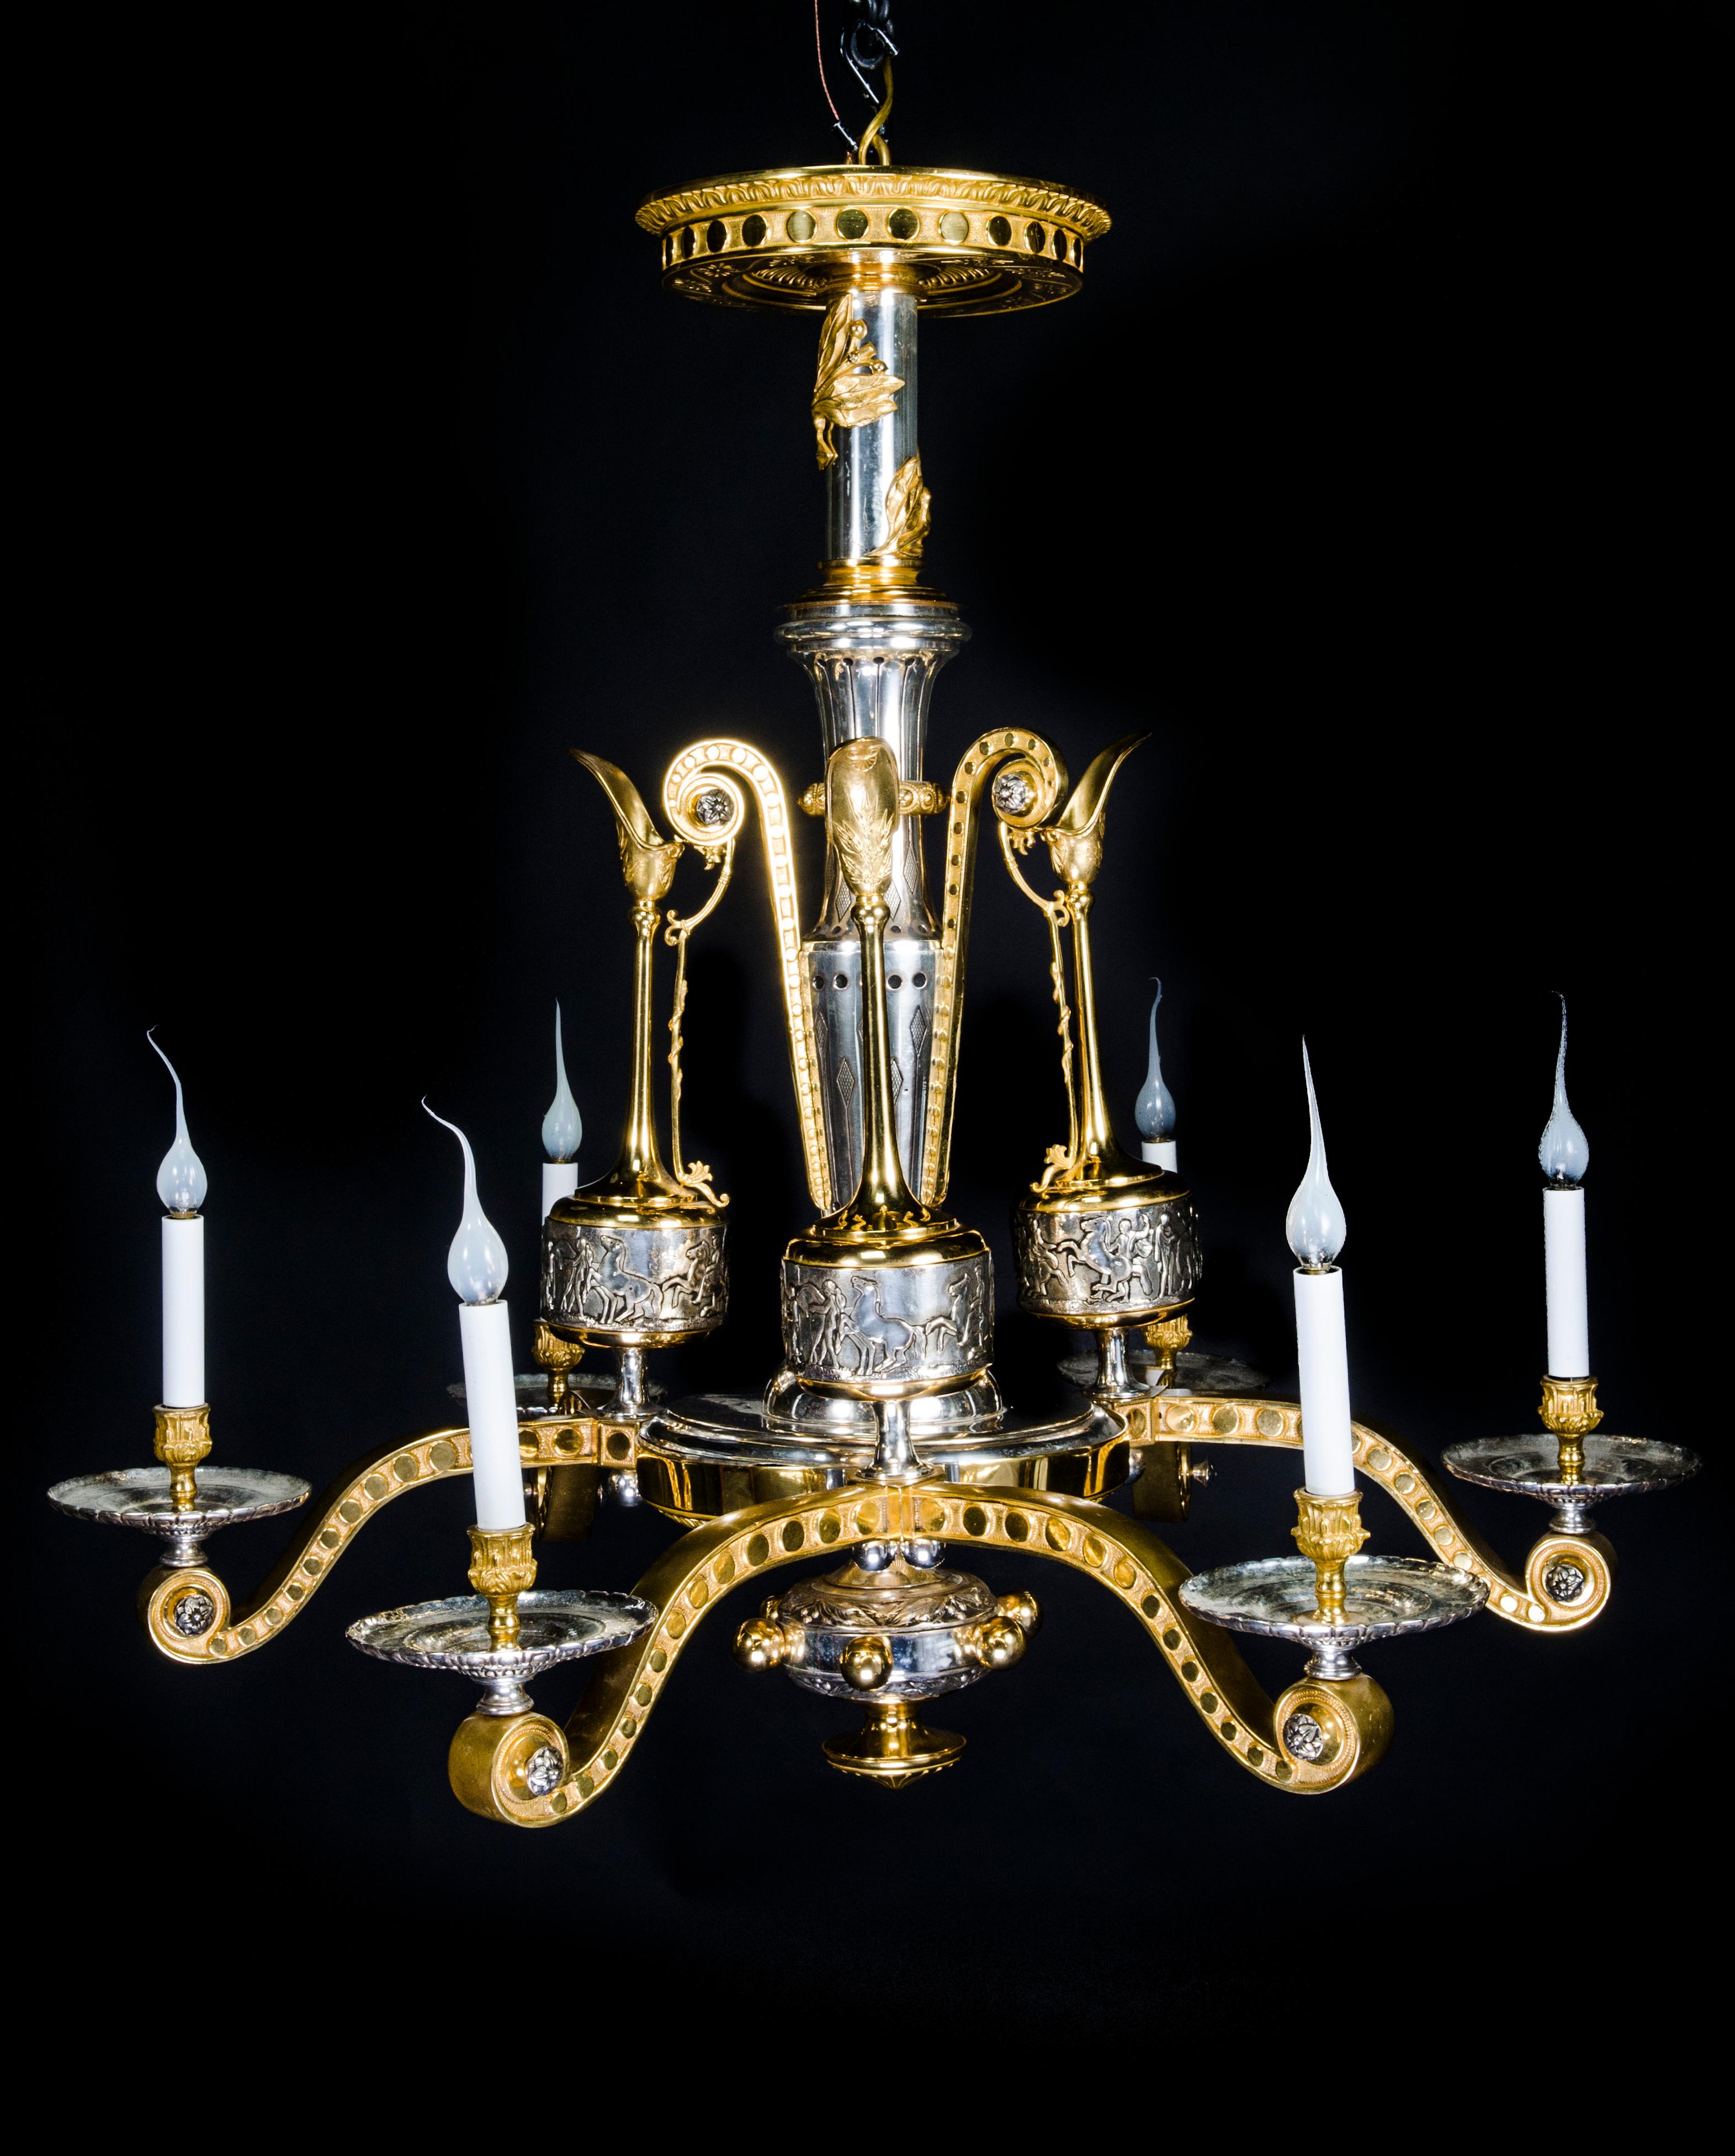 A spectacular and rare large Antique French Neoclassical gilt bronze and silvered bronze multi arm chandelier of exquisite craftsmanship attributed to F. Barbedienne. This extremely unique and large chandelier is embellished with three large